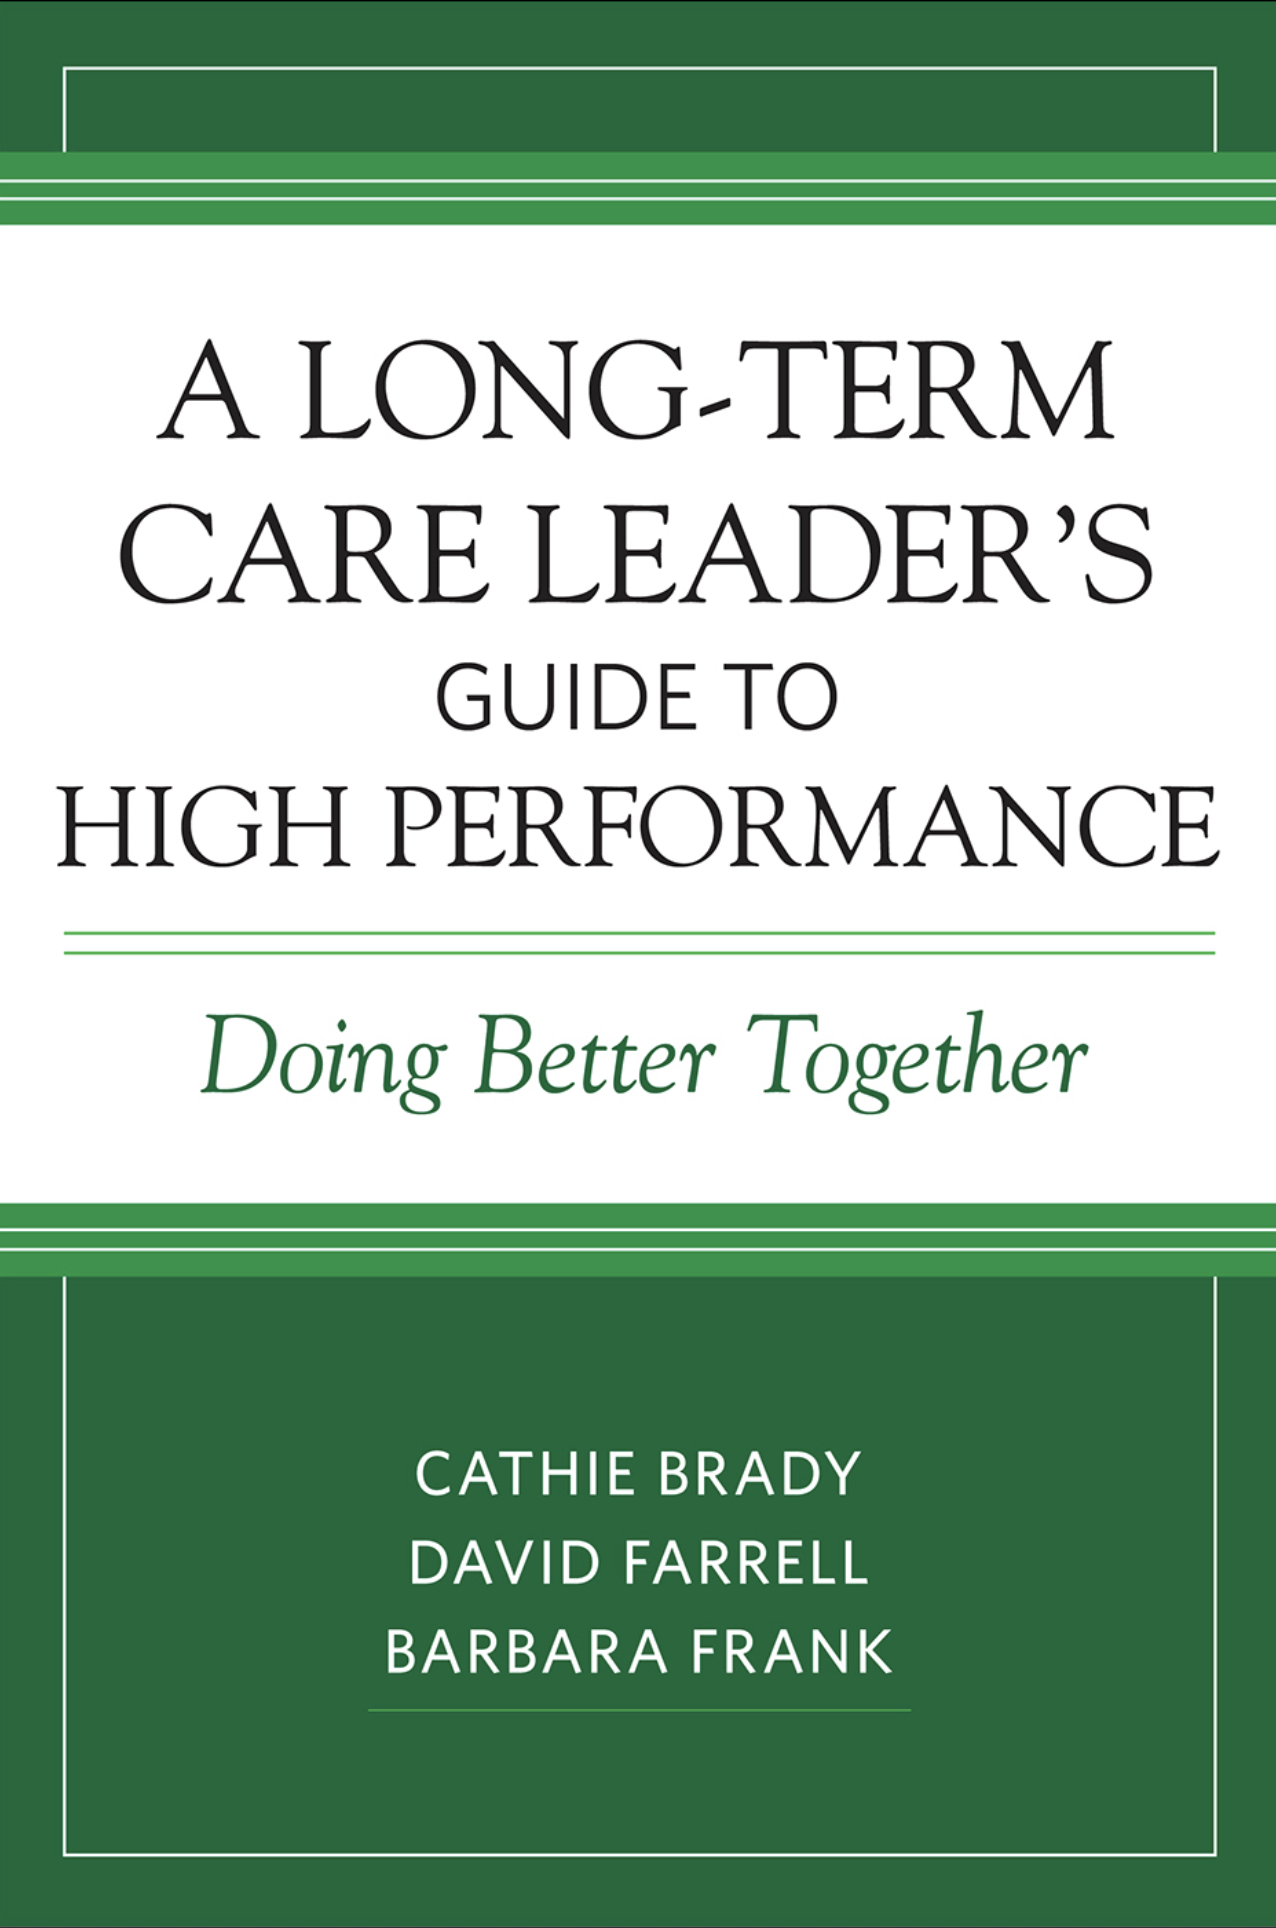 A Long Term Care-Leader's Guide to High Performance.png